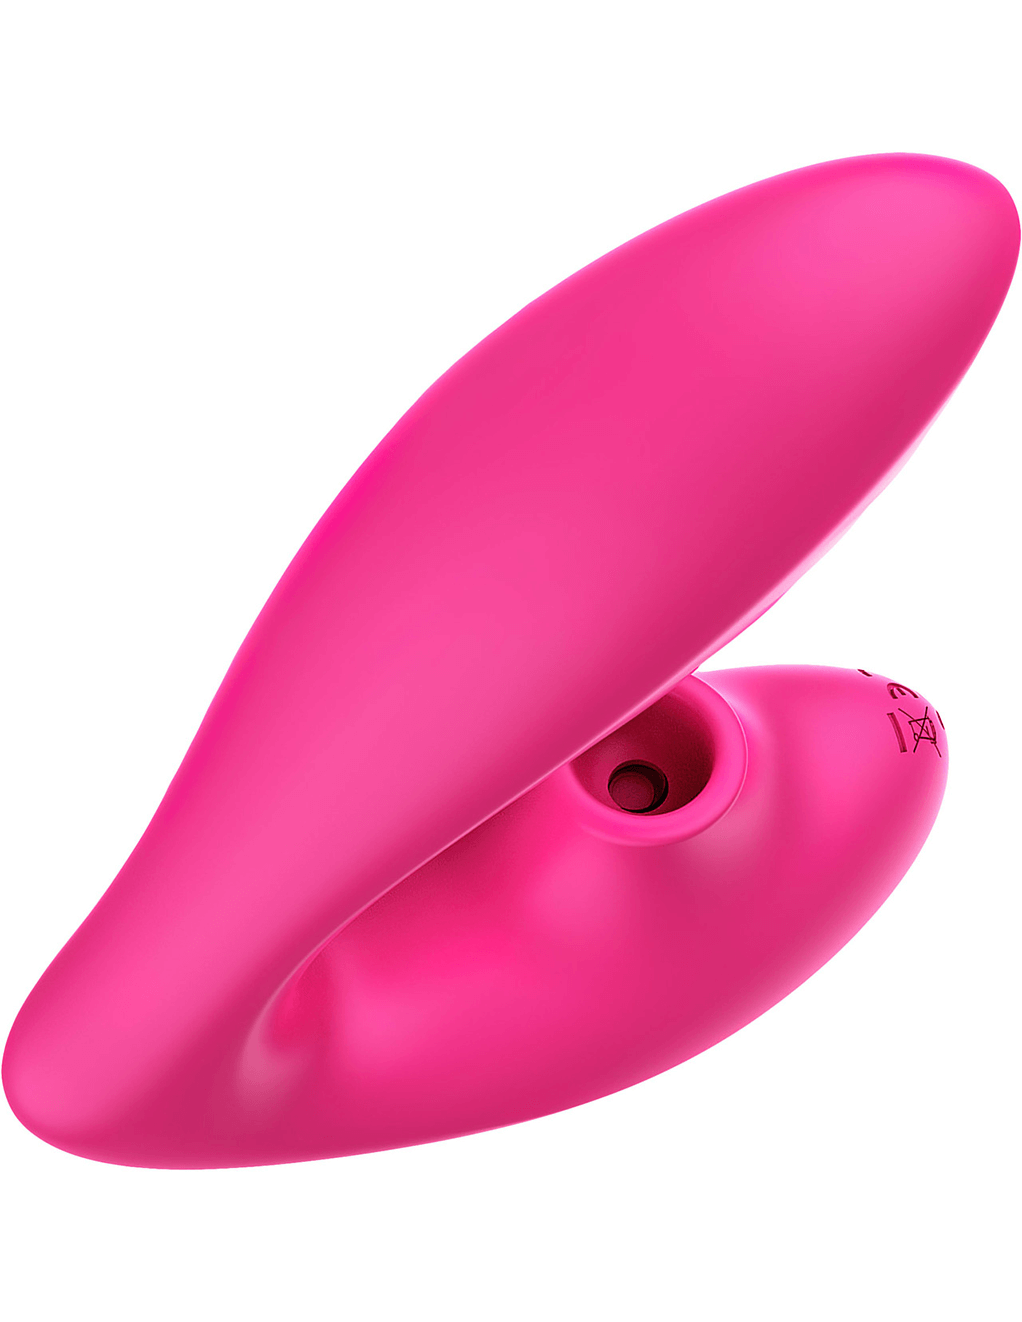 Tracy's Dog OG PRO Clitoral Sucking Vibrator With Pleasure Air, G